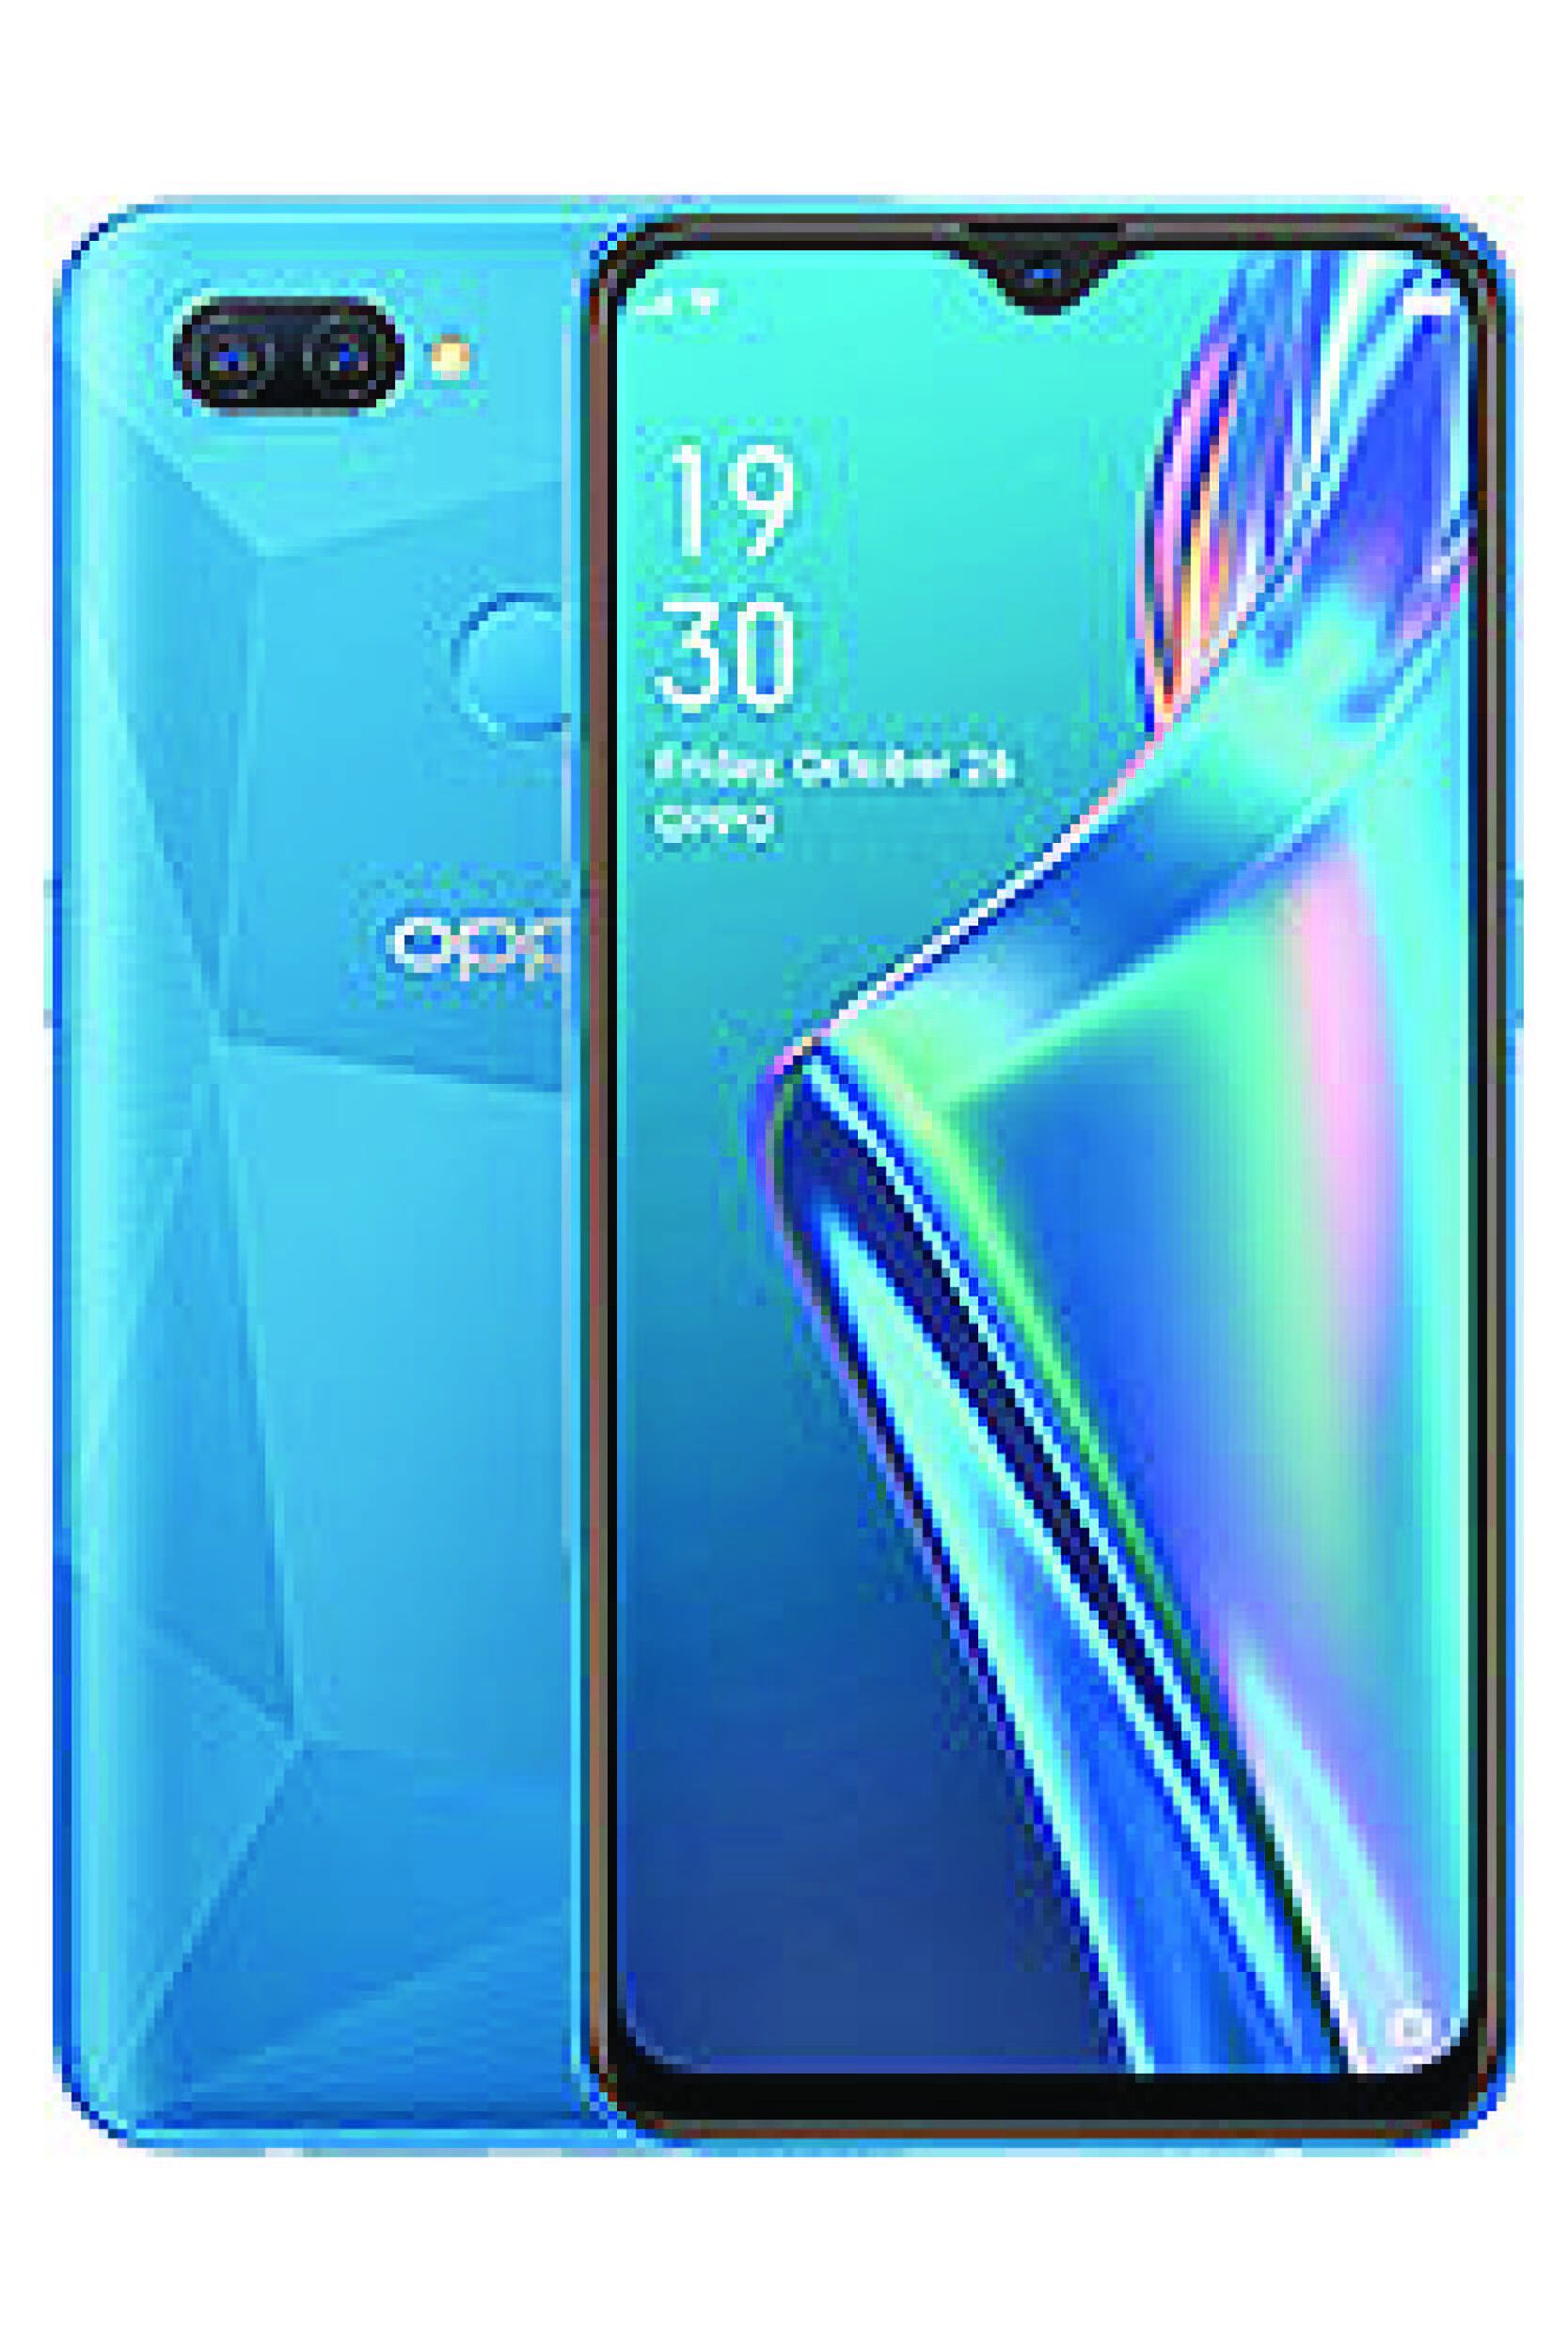 Oppo A12s Price in Pakistan & Specs: Daily Updated | ProPakistani